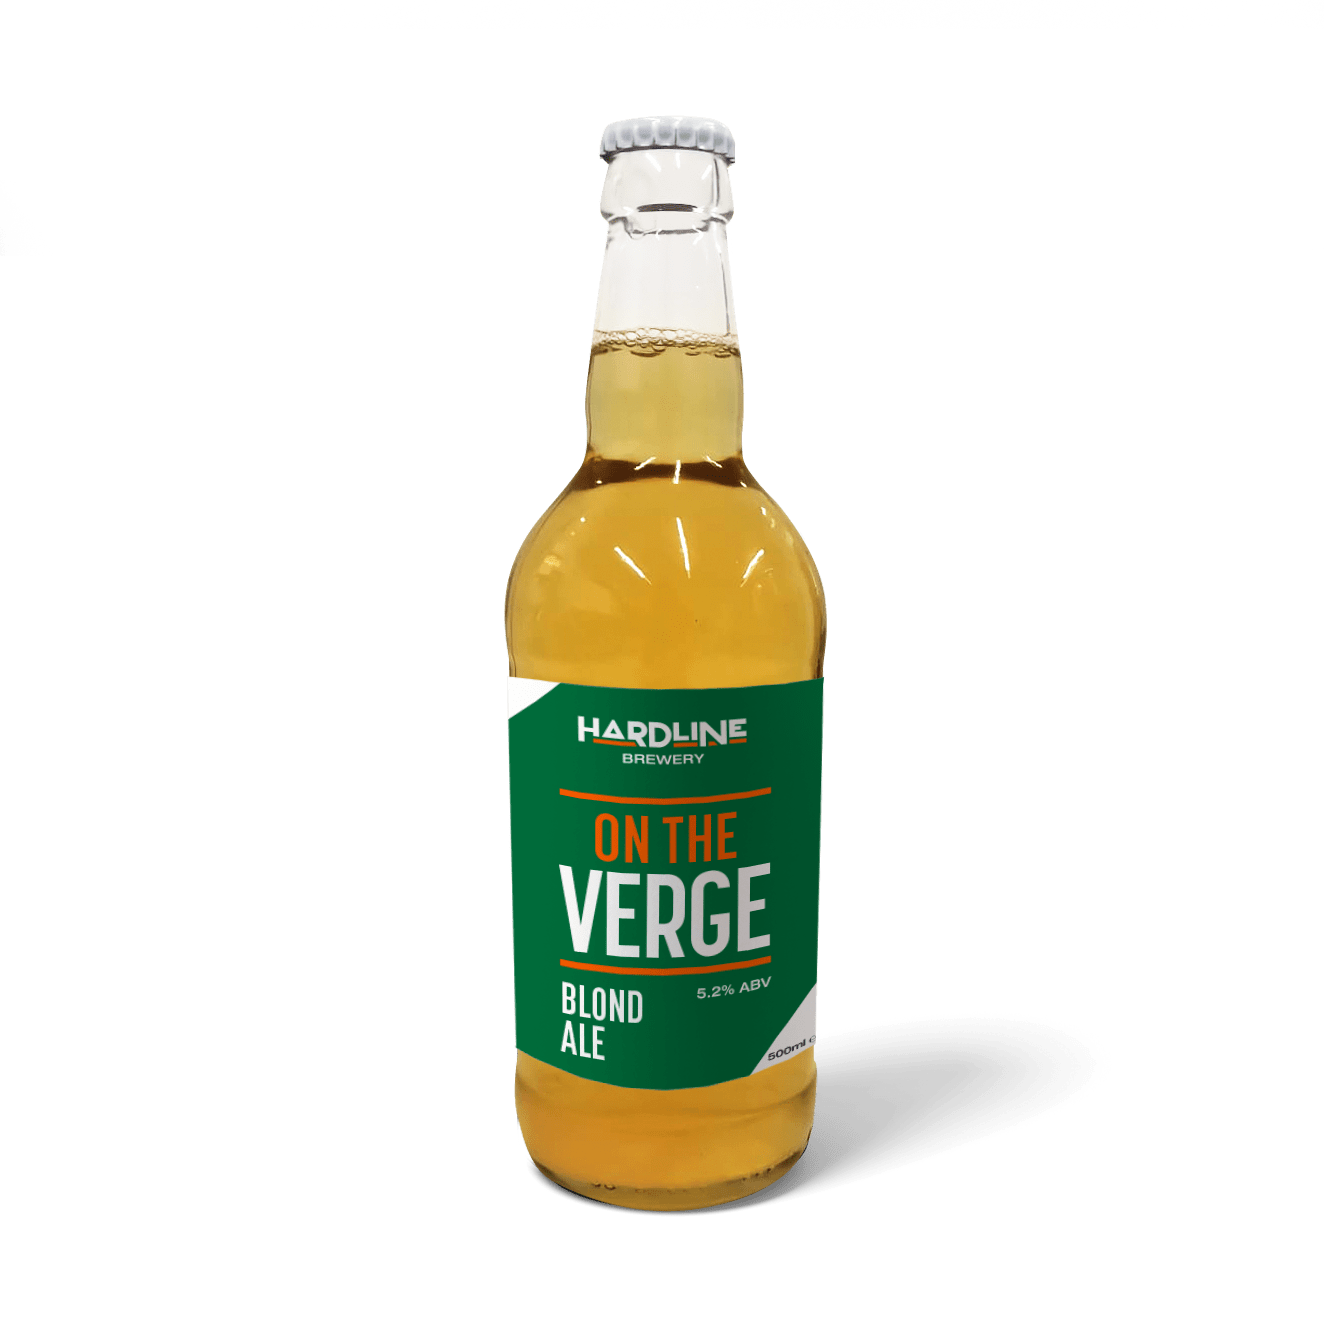 On The Verge – Blond Ale